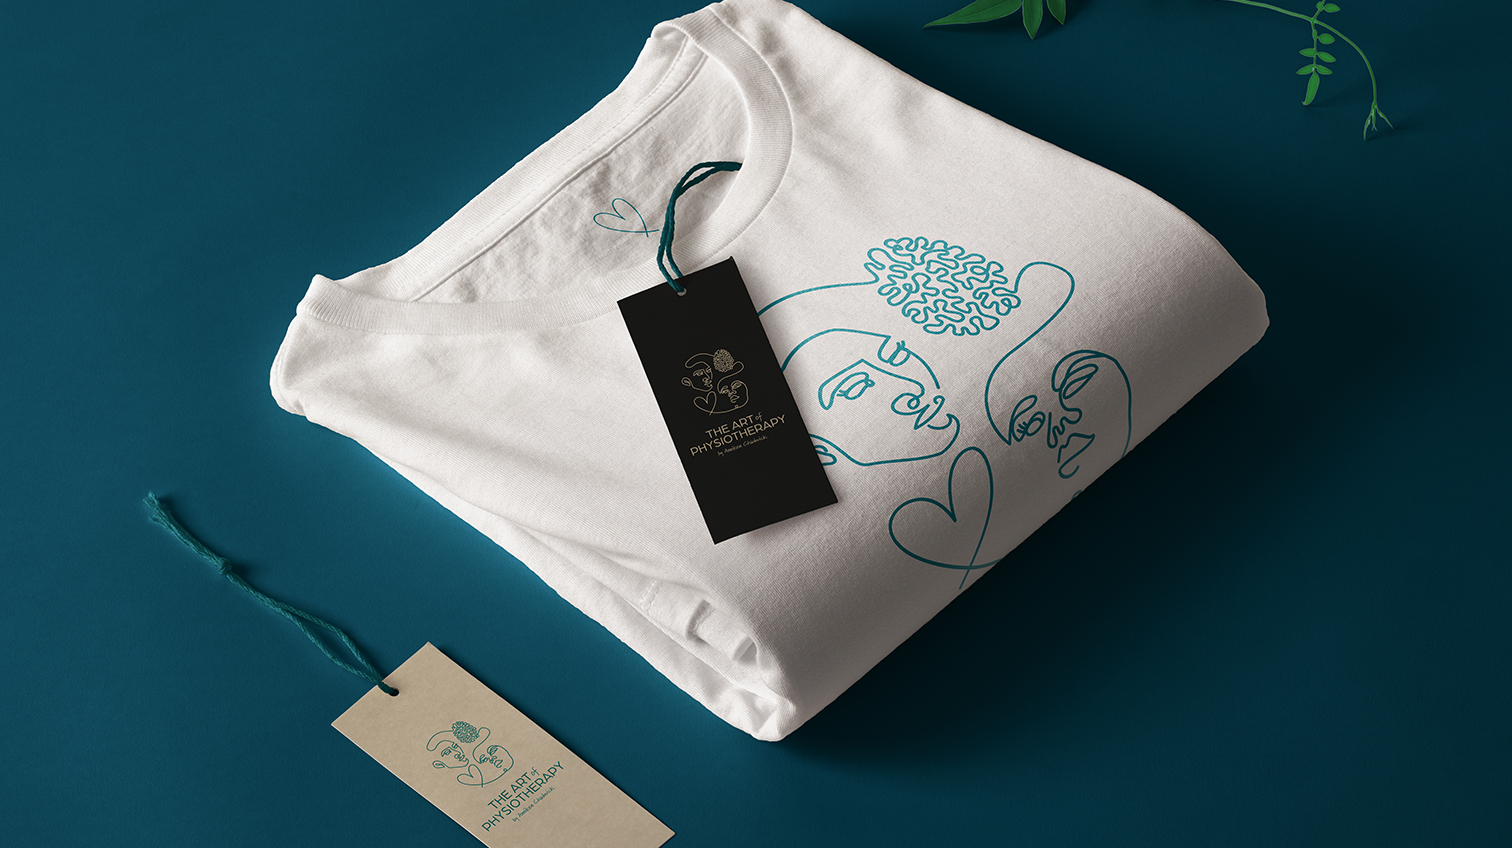 The Art of Physiotherapy folded t-shirt and clothing tag, with logo design - White Canvas Design